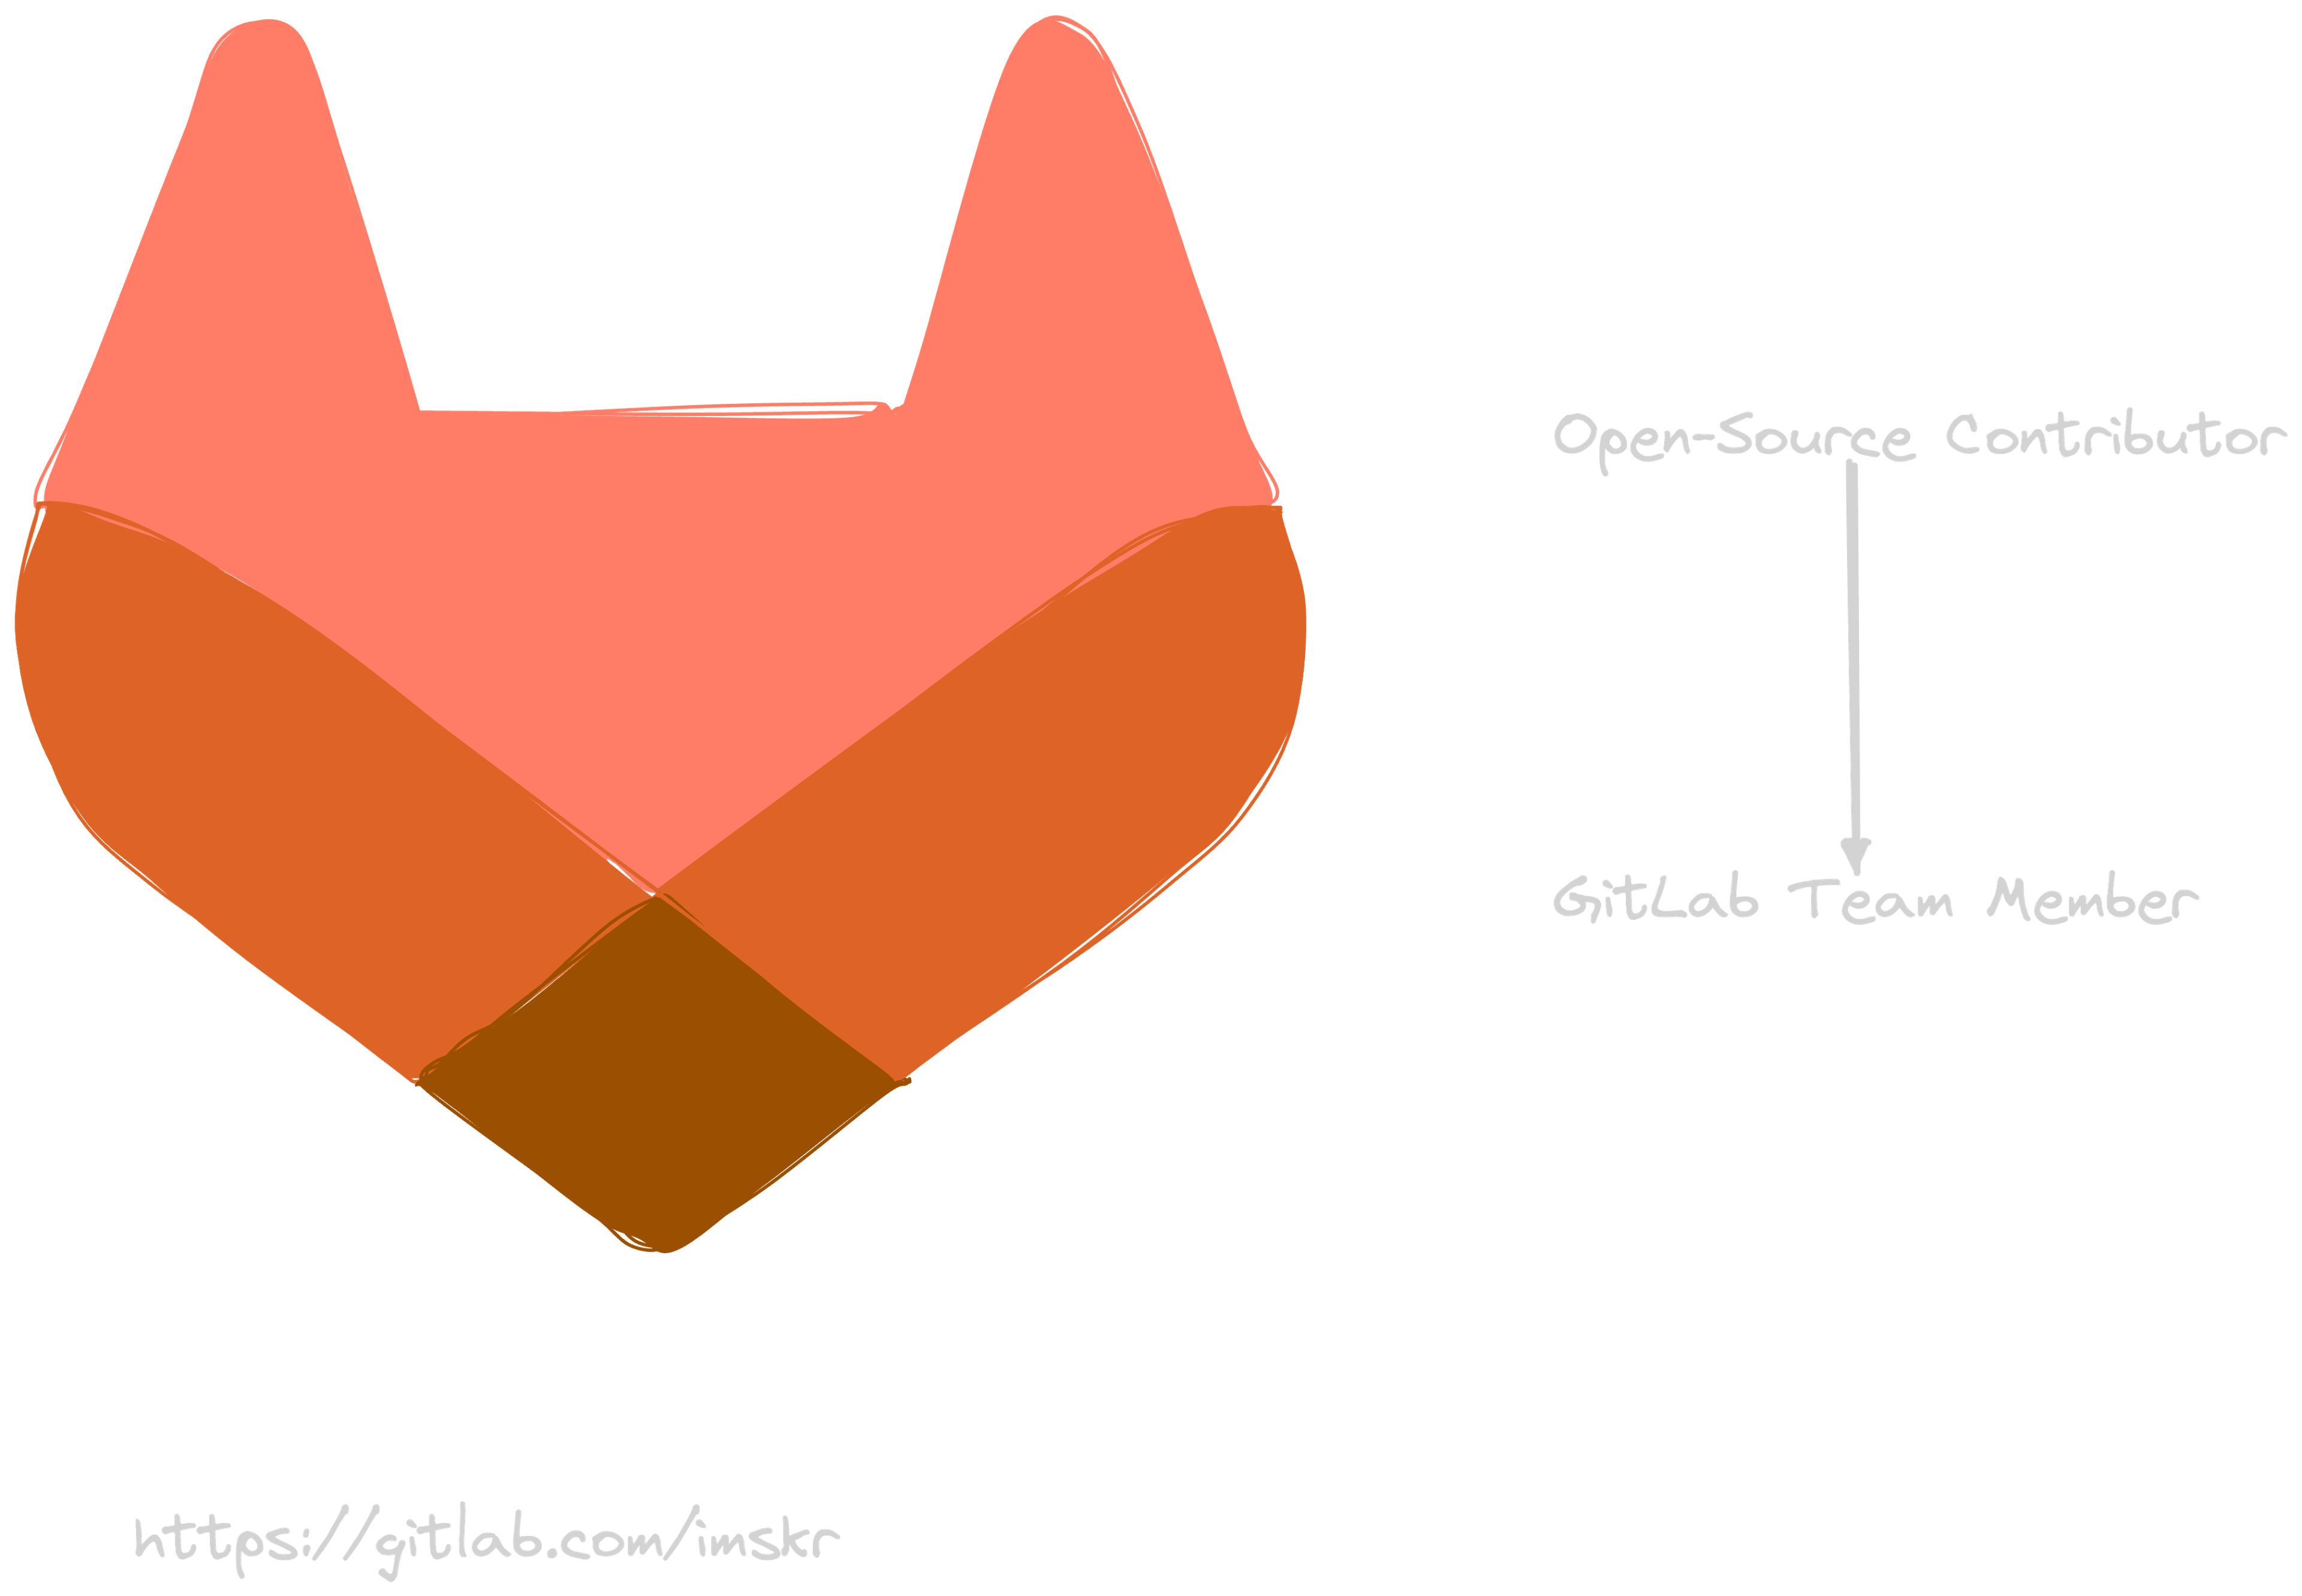 My Open Source Journey at GitLab